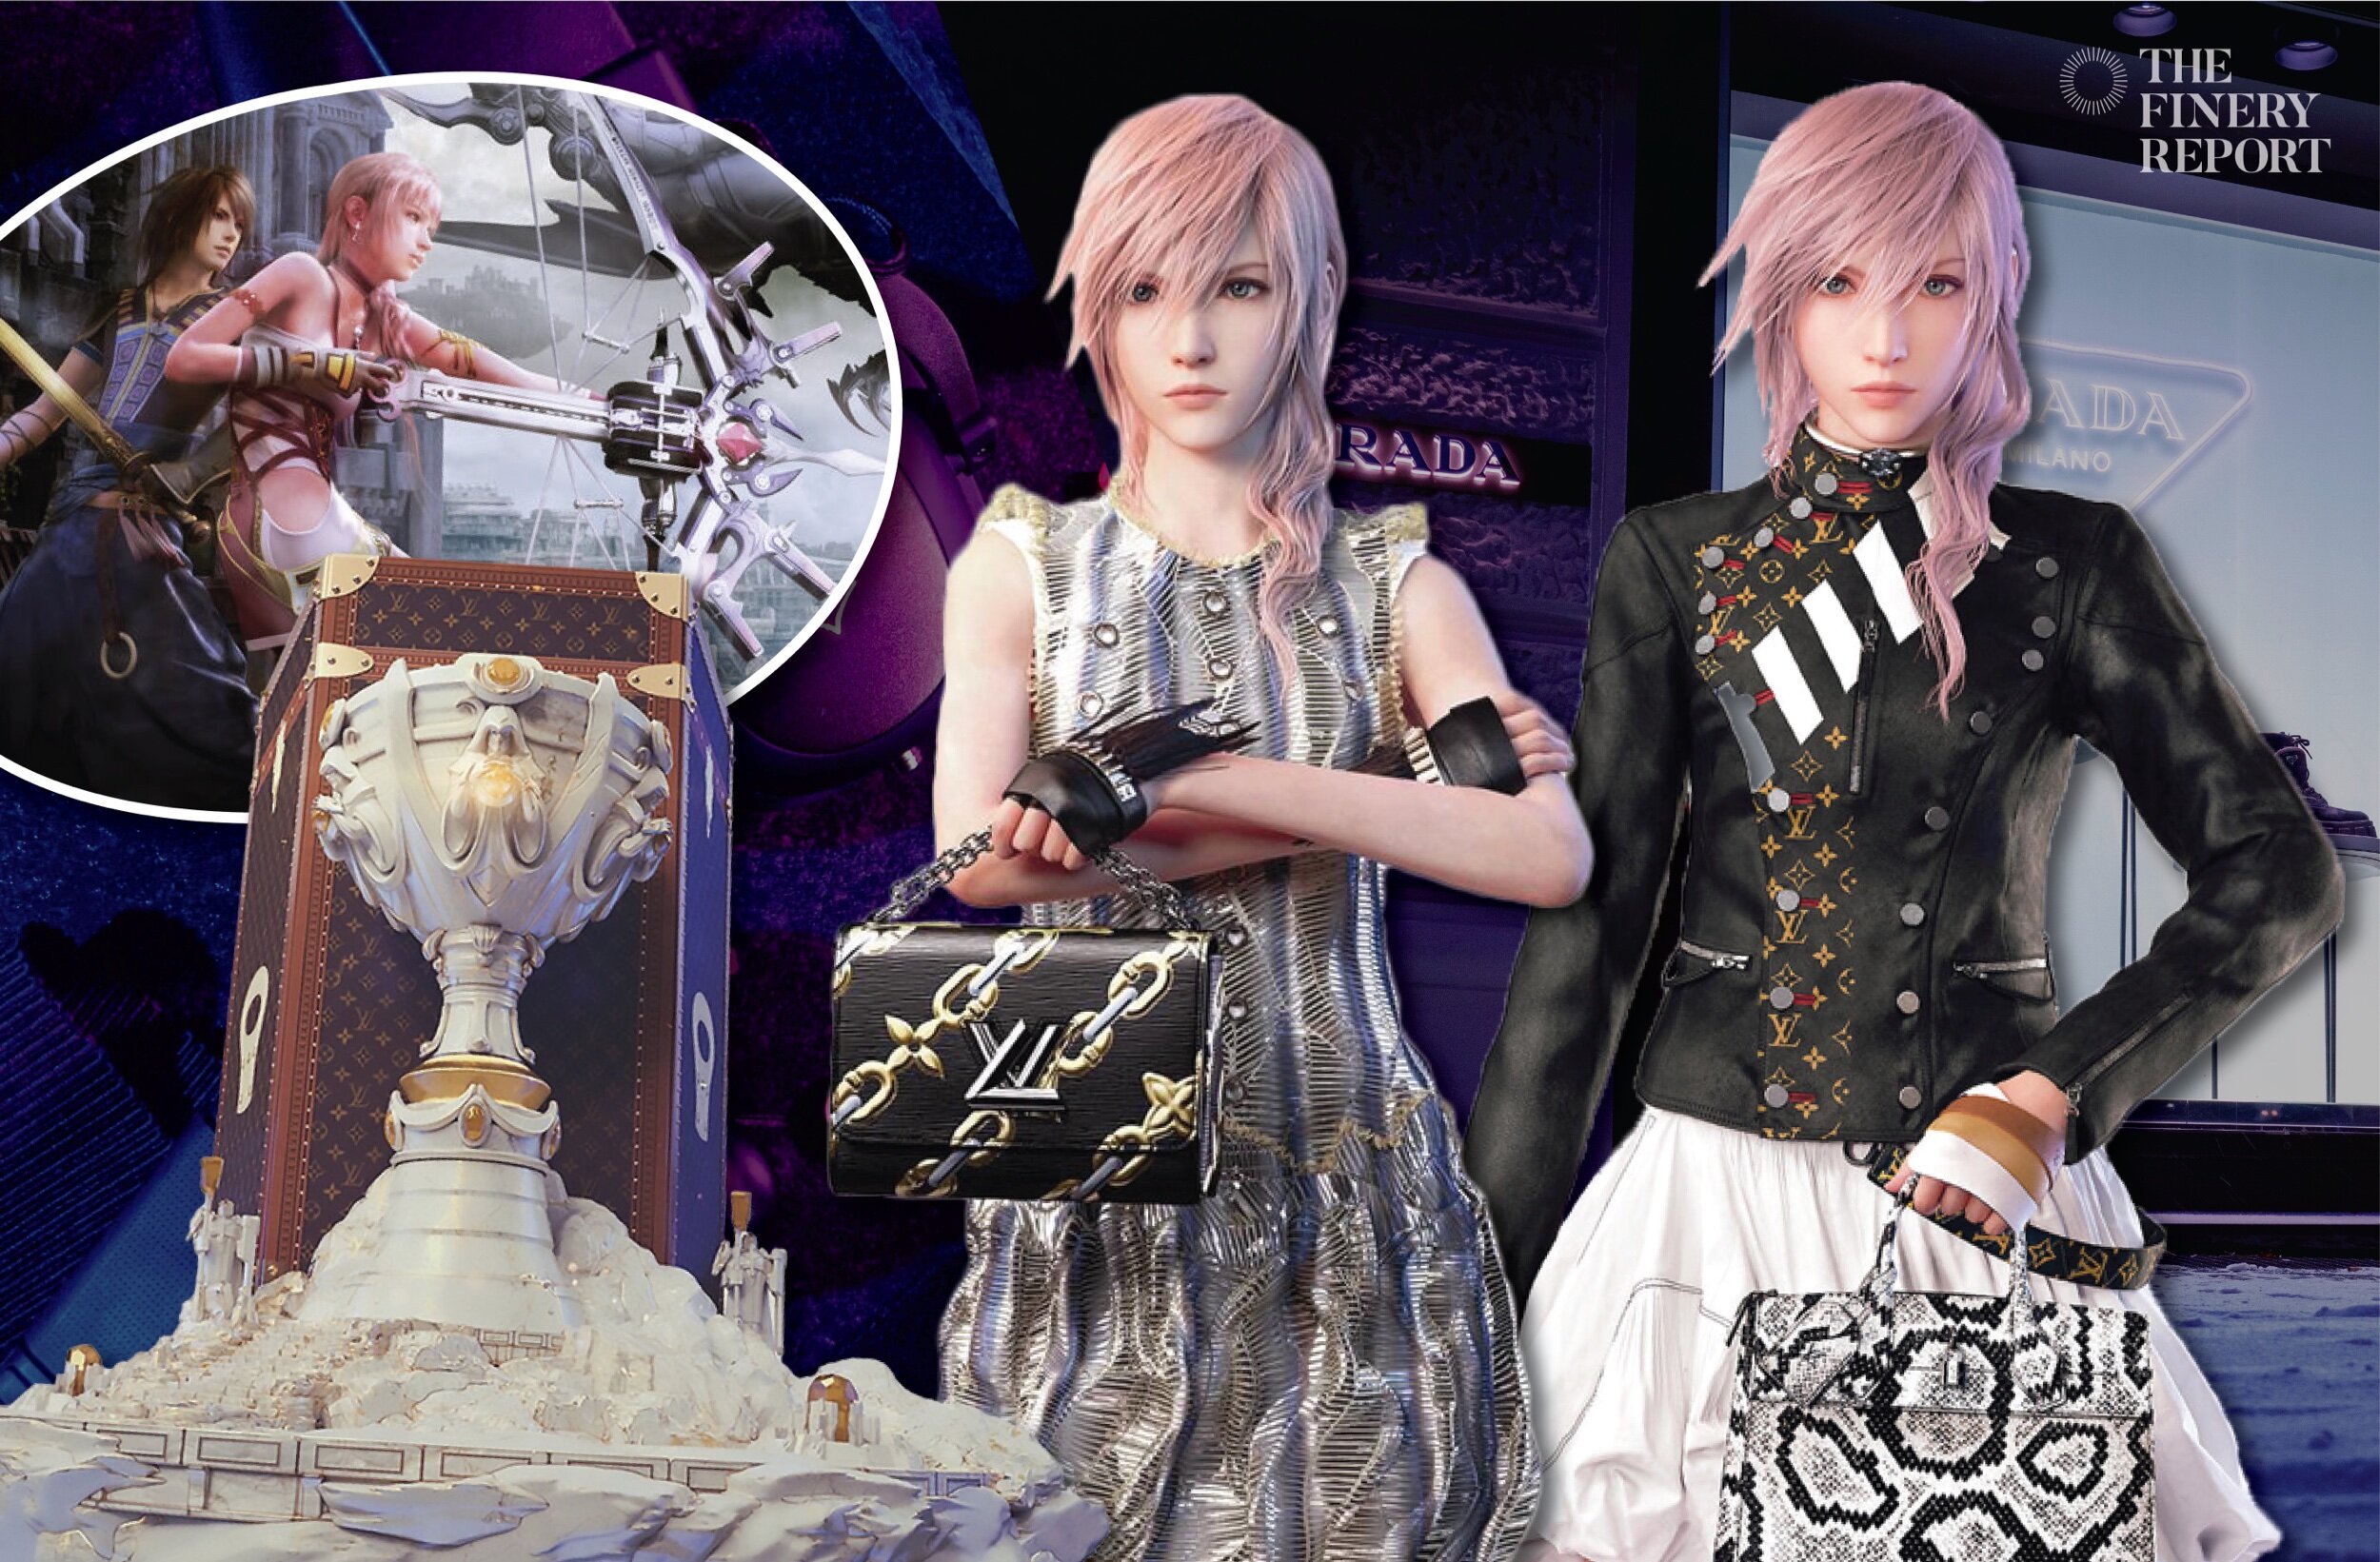 Louis Vuitton's Next Model Is a 'Final Fantasy' Character